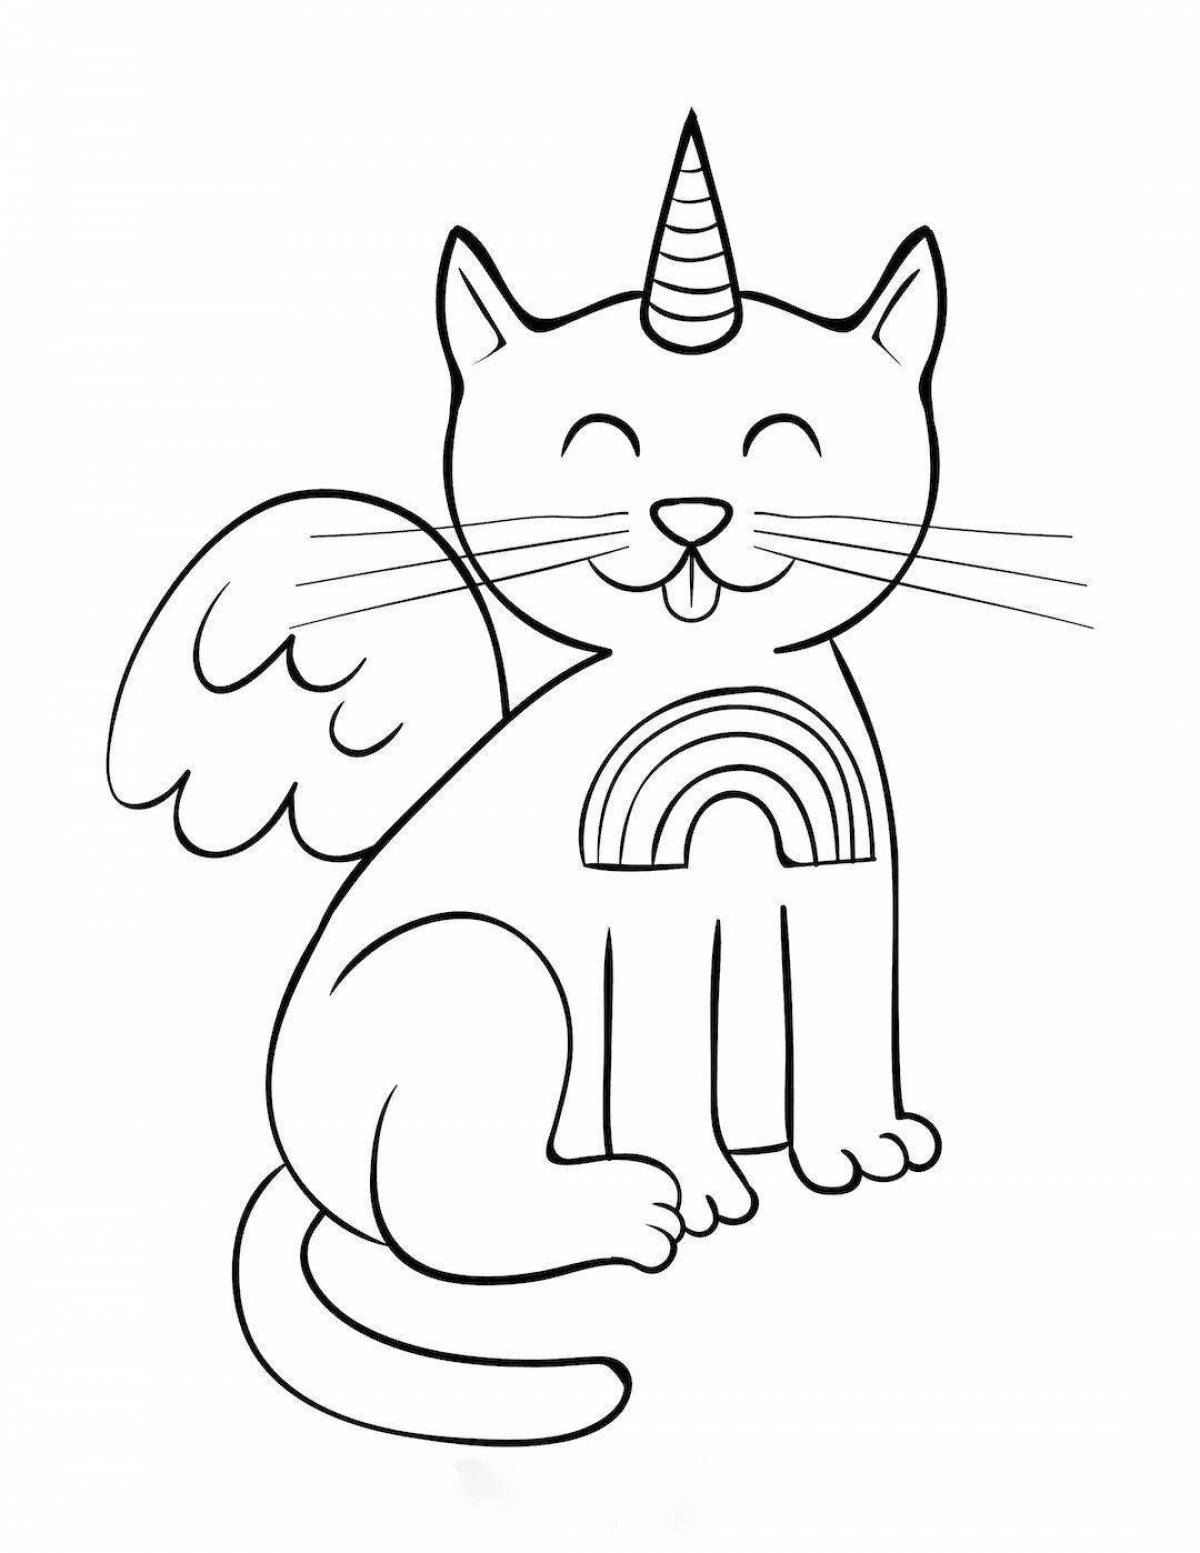 Radiant coloring page unicorn cat for kids